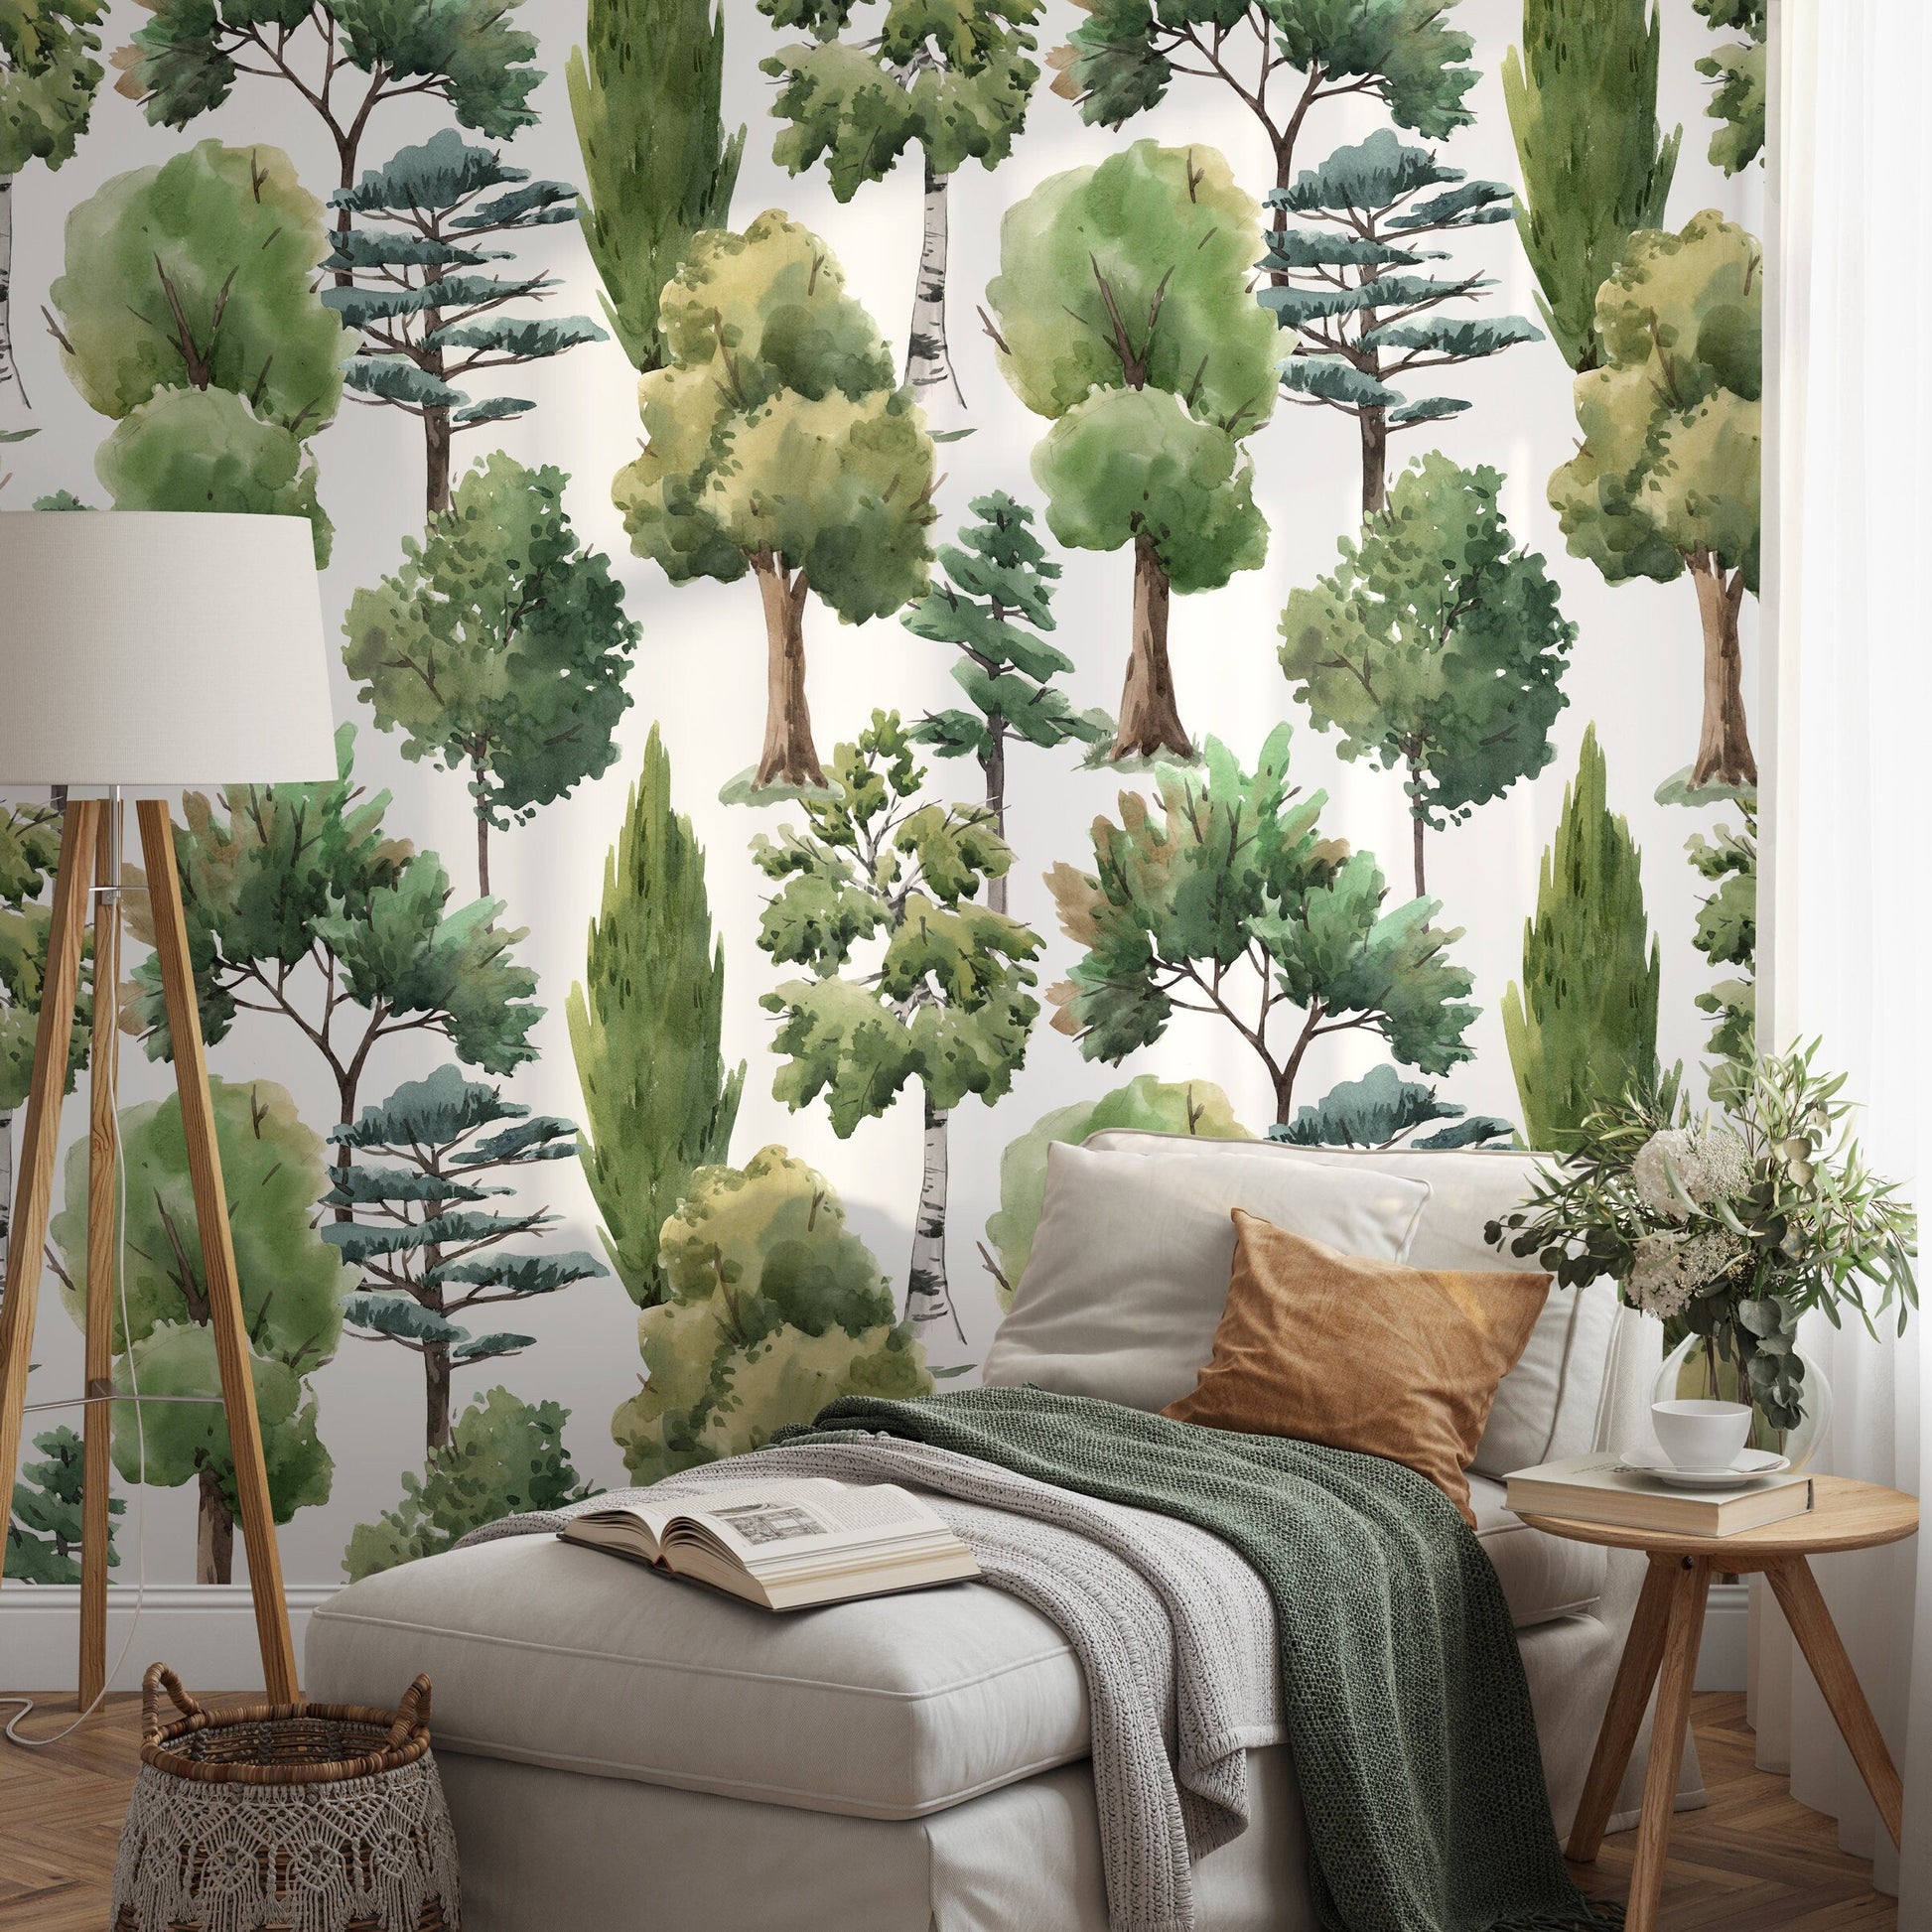 Removable Wallpaper Wall Temporary Wallpaper Nursery Wallpaper Wall Decor Wall Paper Removable Peel and Stick Wallpaper - A687